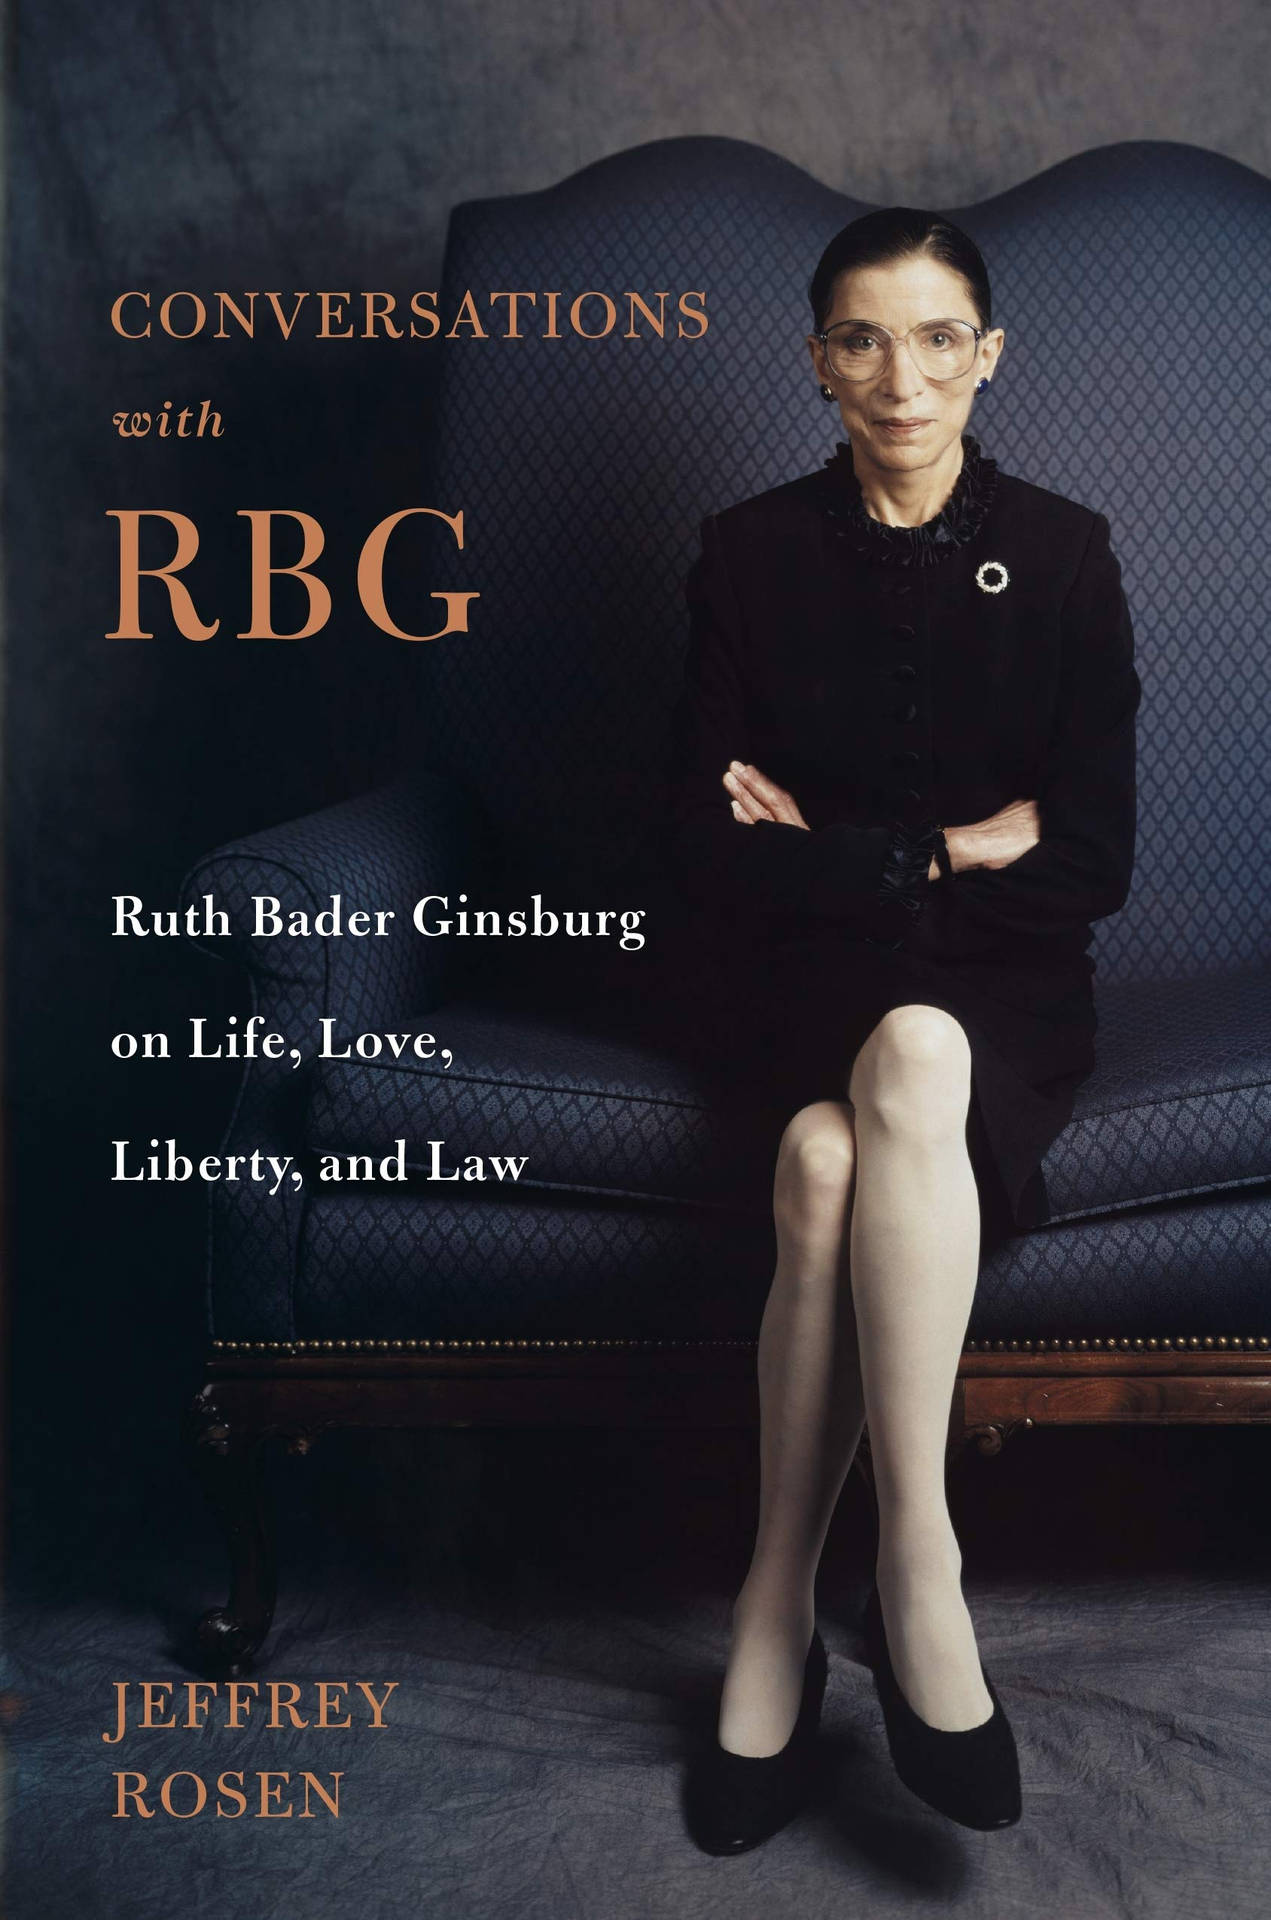 Ruth Bader Ginsburg Magazine Cover Photograph Background